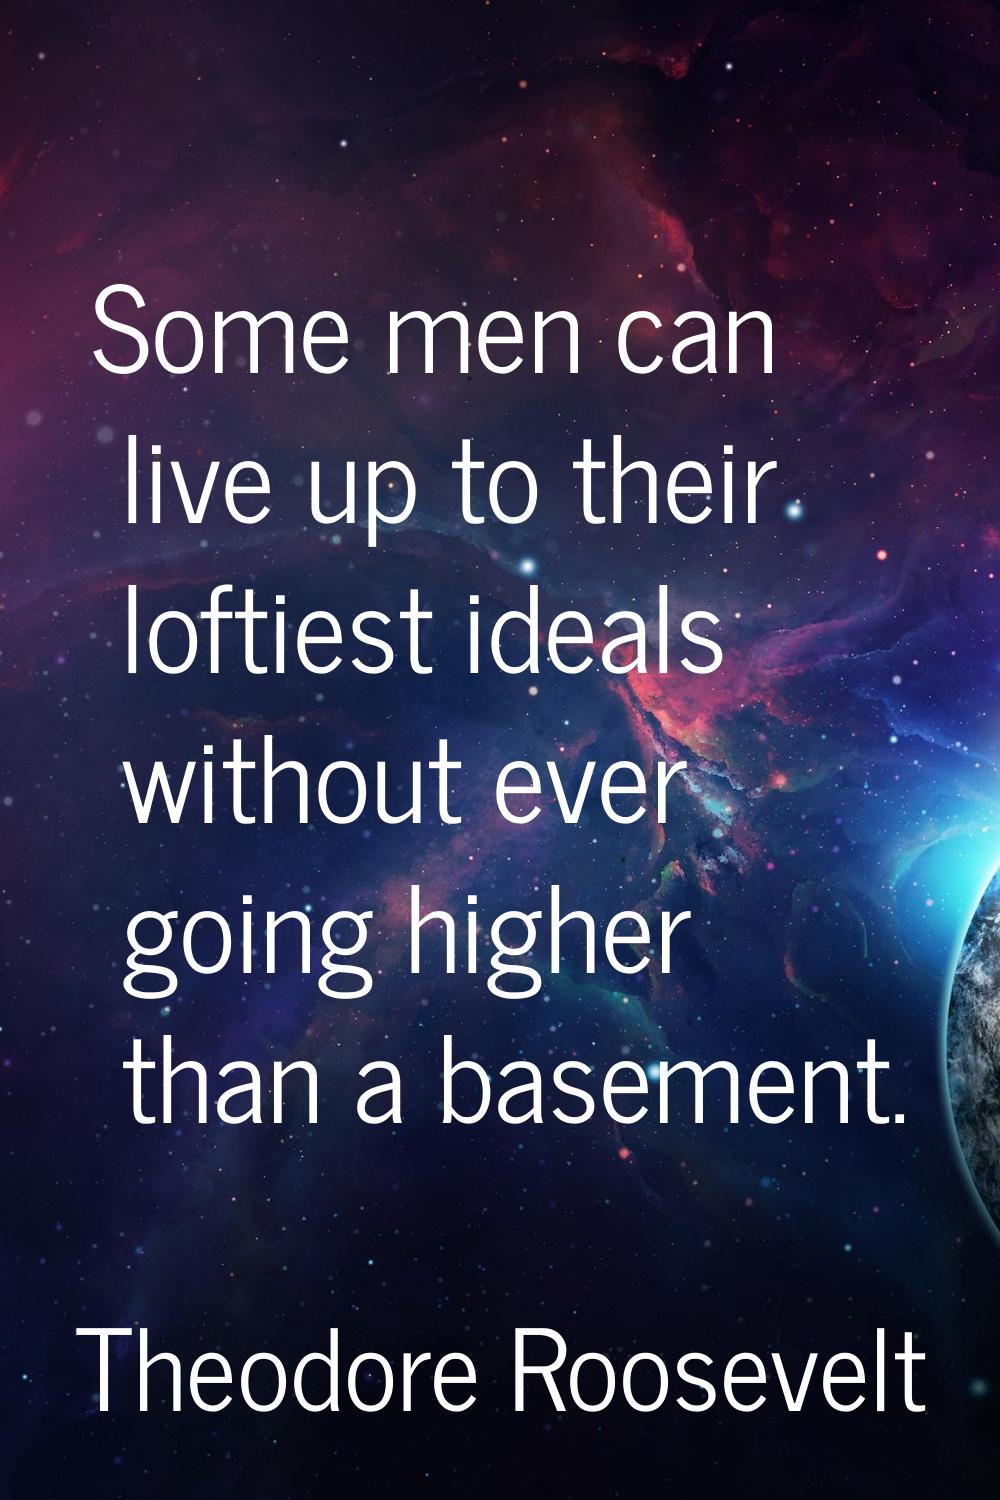 Some men can live up to their loftiest ideals without ever going higher than a basement.